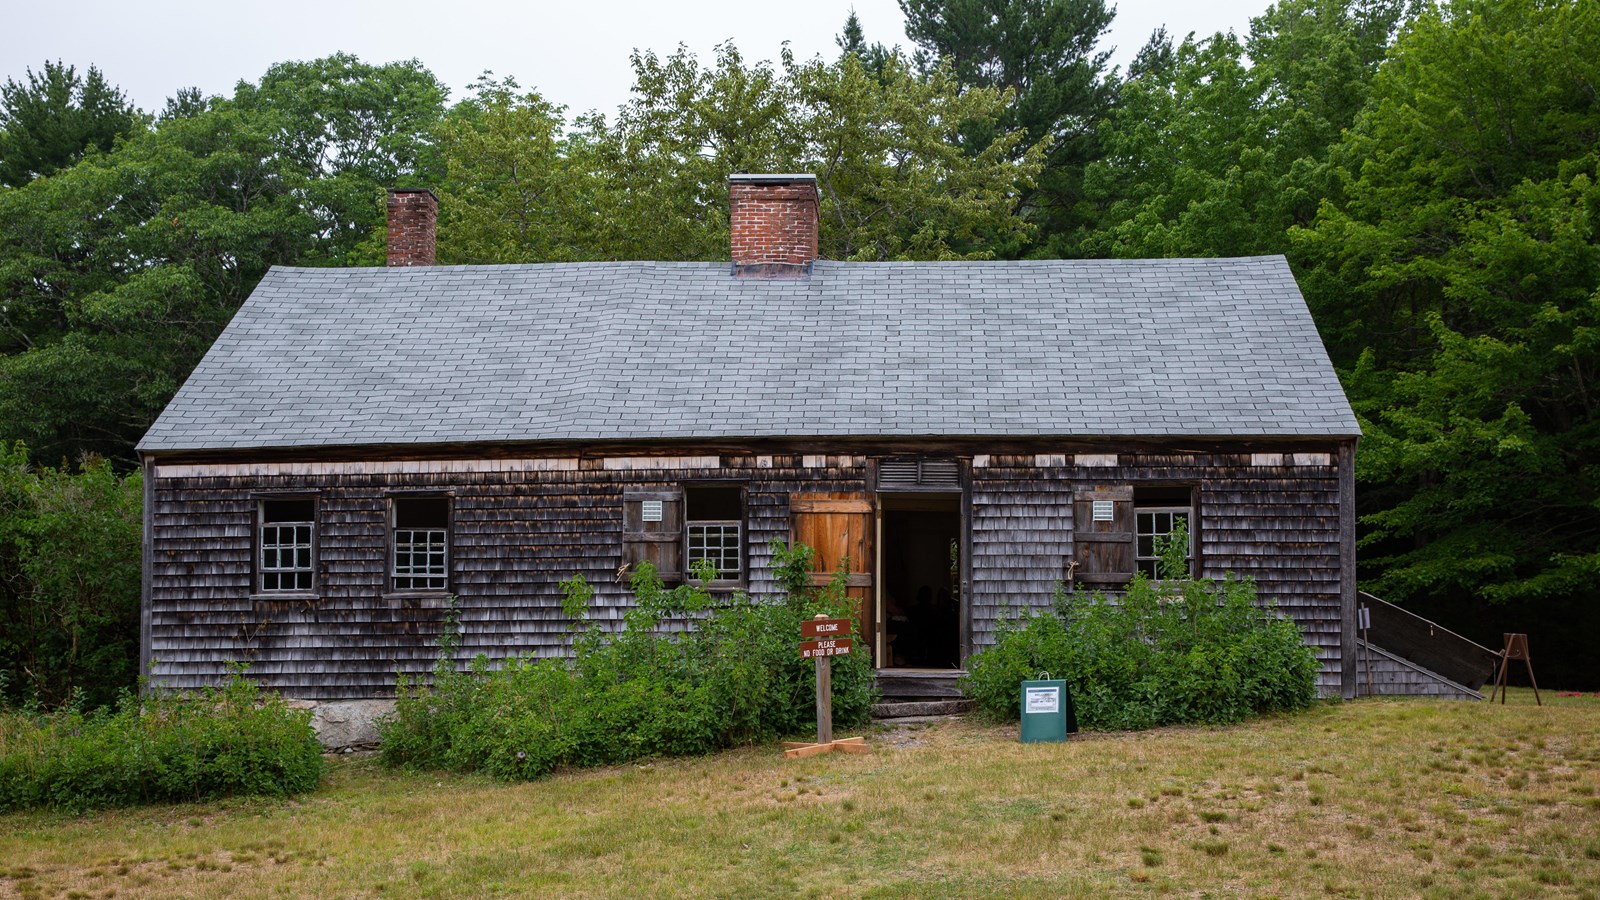 Wooden structure with two chimneys surrounded by a yard